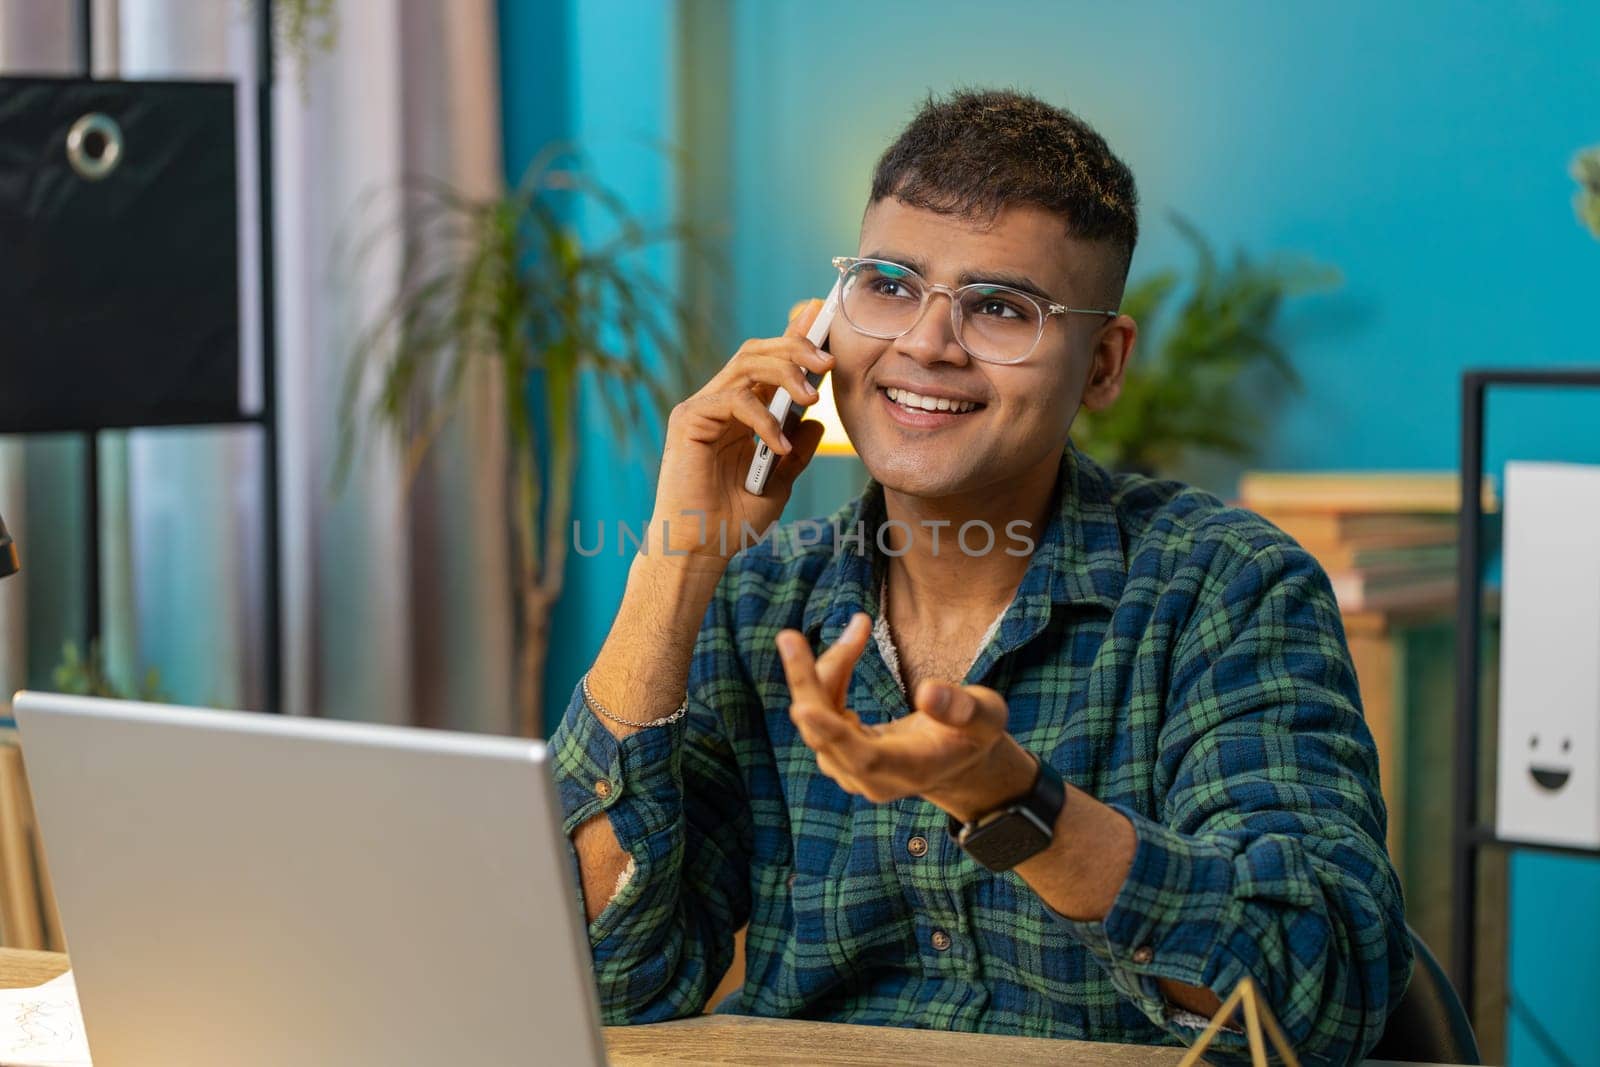 Indian man making phone call conversation with client or colleague friend. Arabian guy freelancer enjoying mobile loudspeaker talking gossip rumors, good news at home office table workplace. Lifestyle